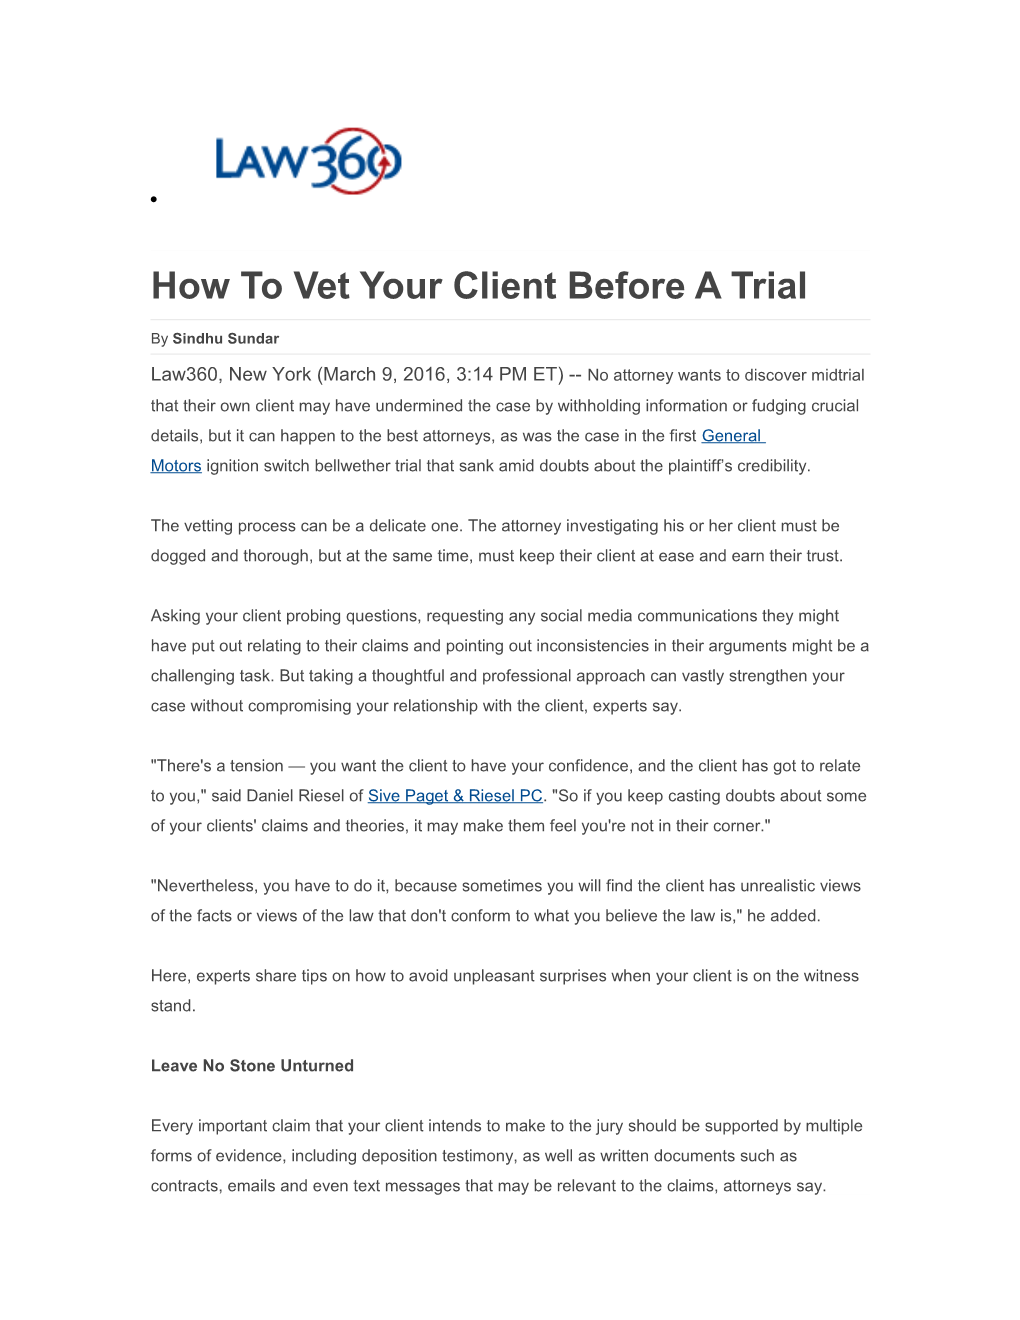 How to Vet Your Client Before a Trial